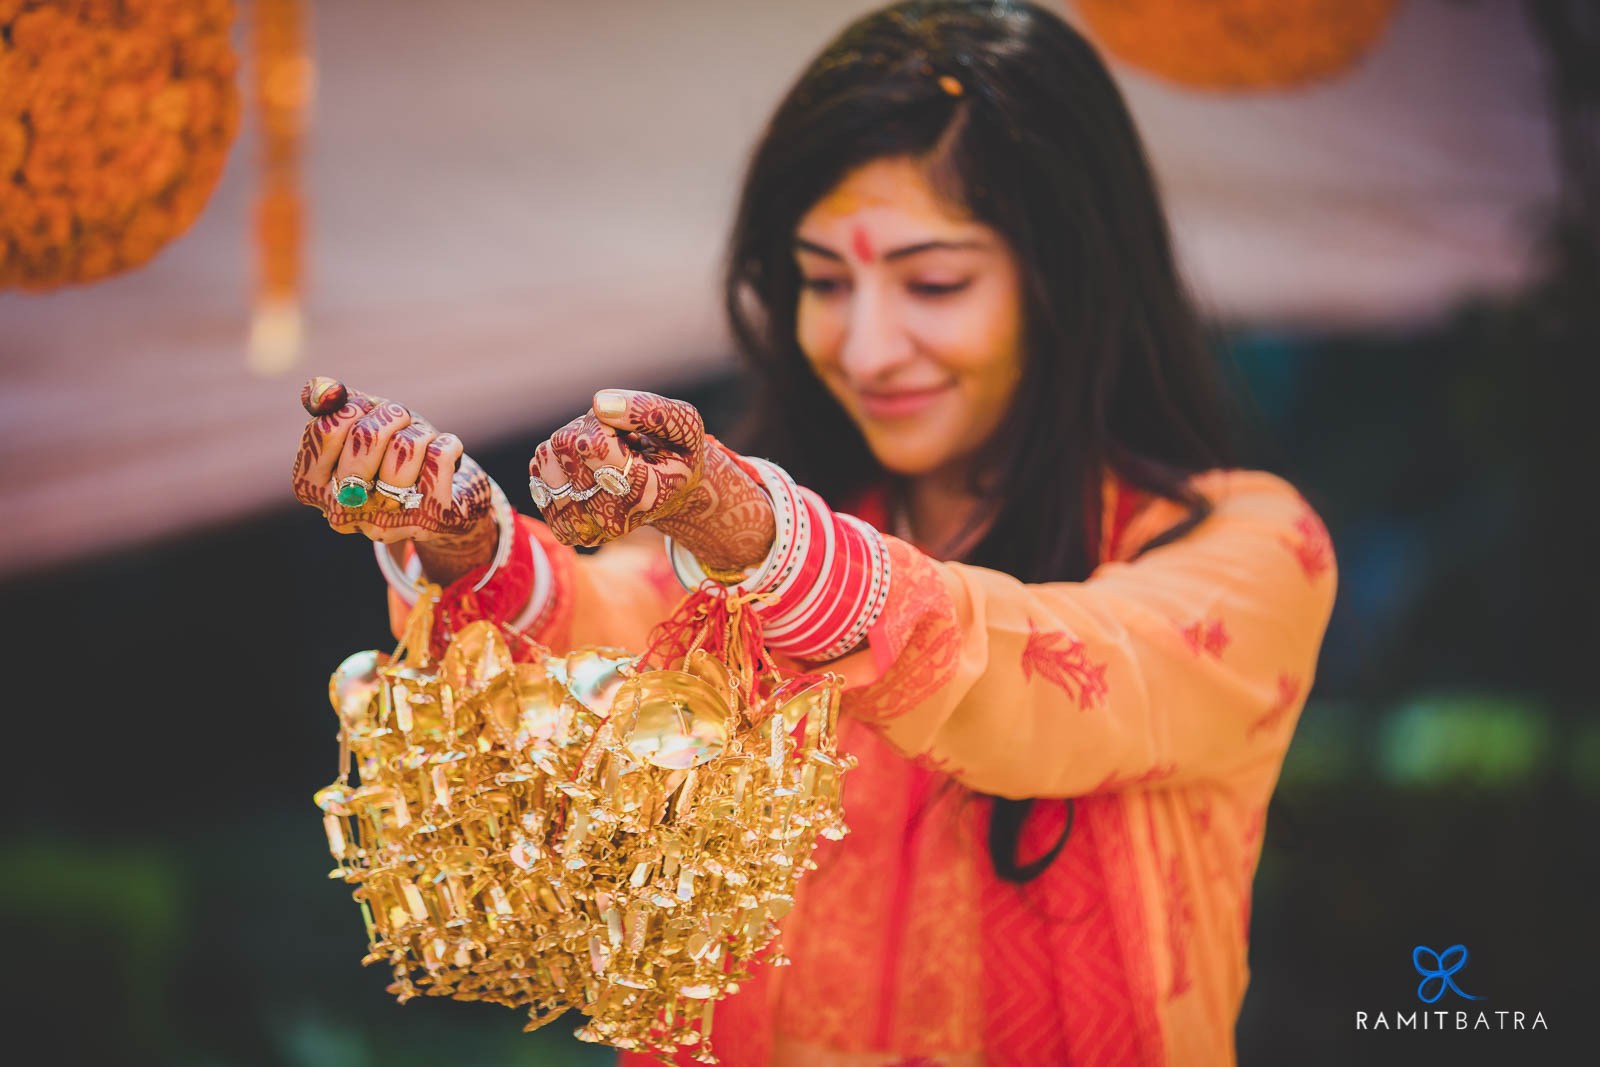 Indian Wedding Ceremony Rituals And Customs Wedding Indian Hindu Ceremony Traditions Marriage